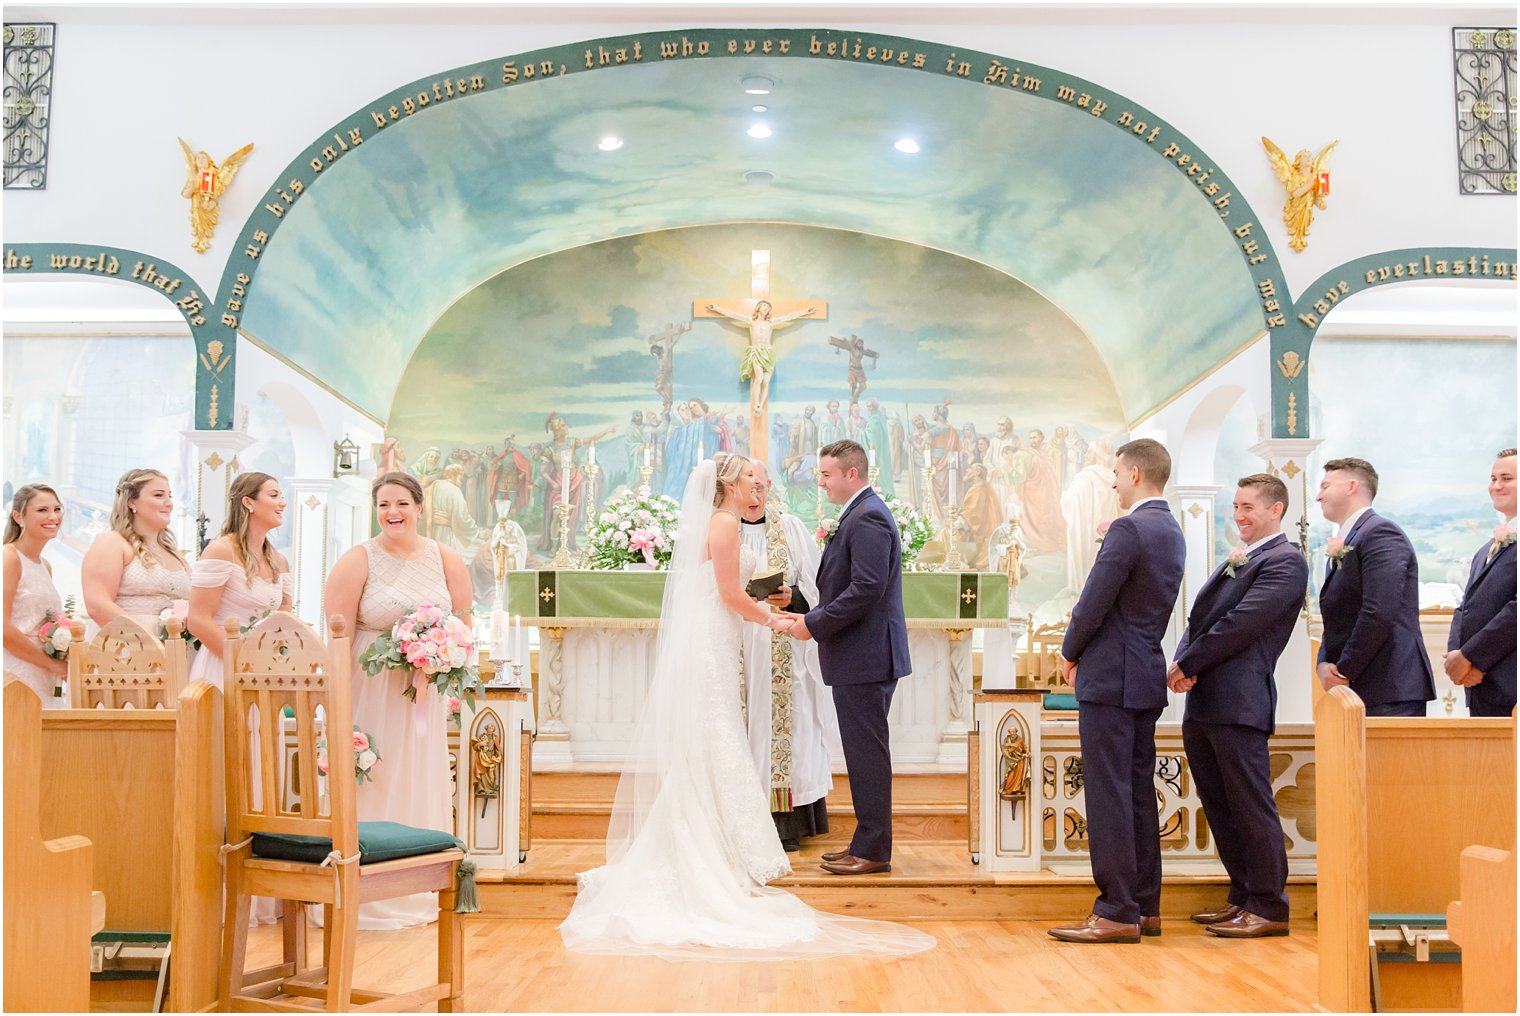 bride and groom exchange vows in church ceremony during New Jersey wedding day 